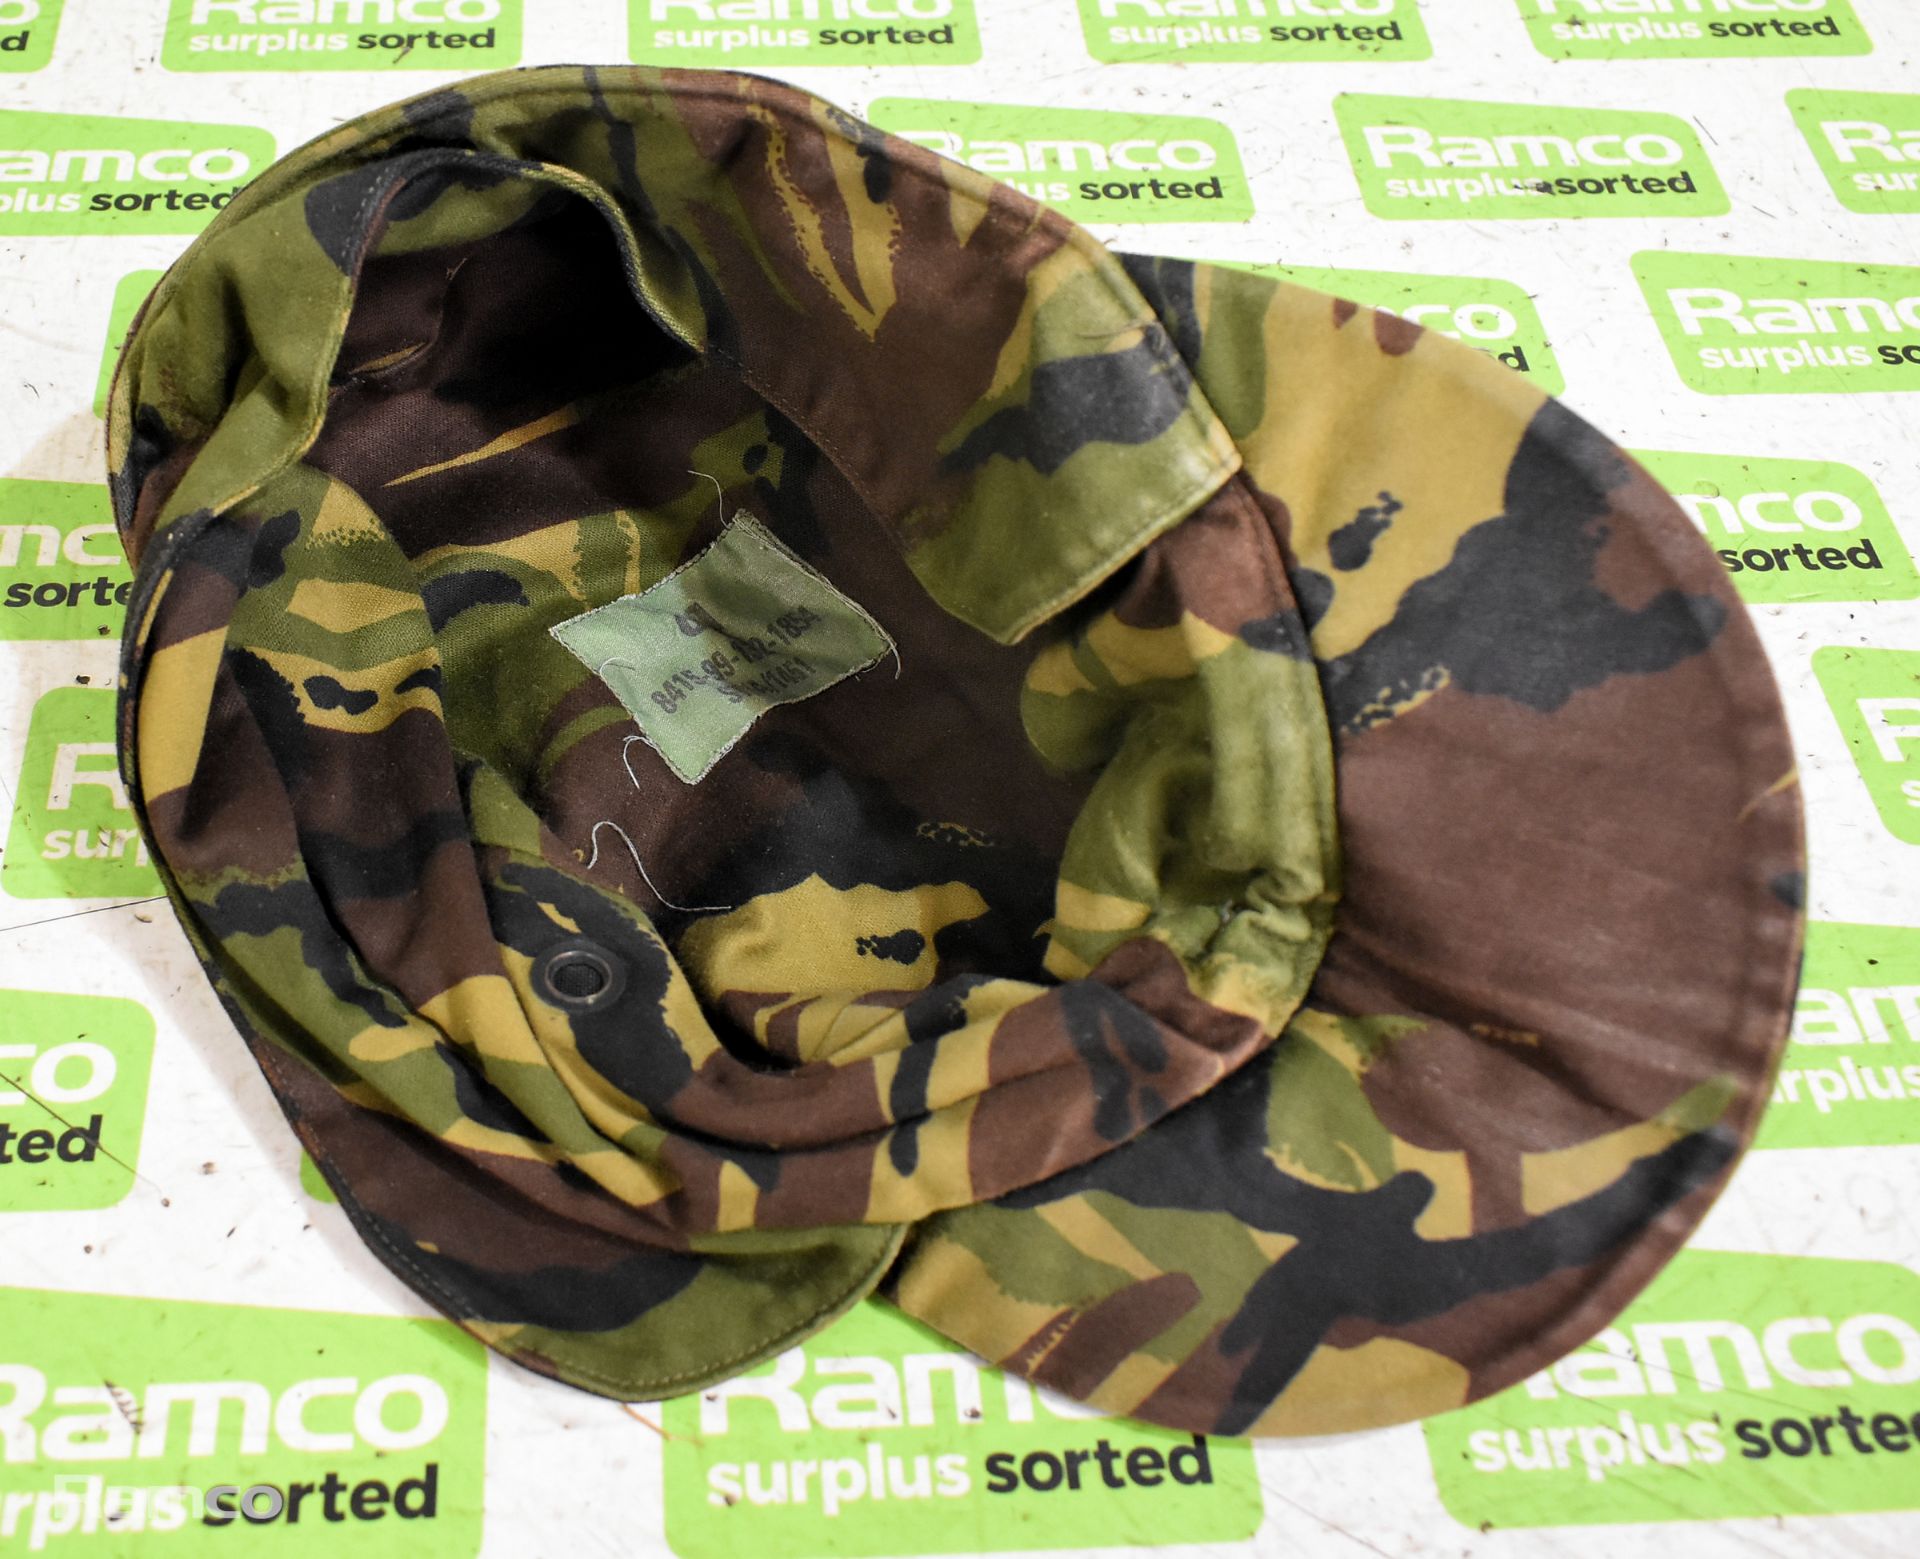 British Army DPM helmet covers, DPM combat hats, DPM cold weather caps, Mixed pouches, DPM hats - Image 2 of 12